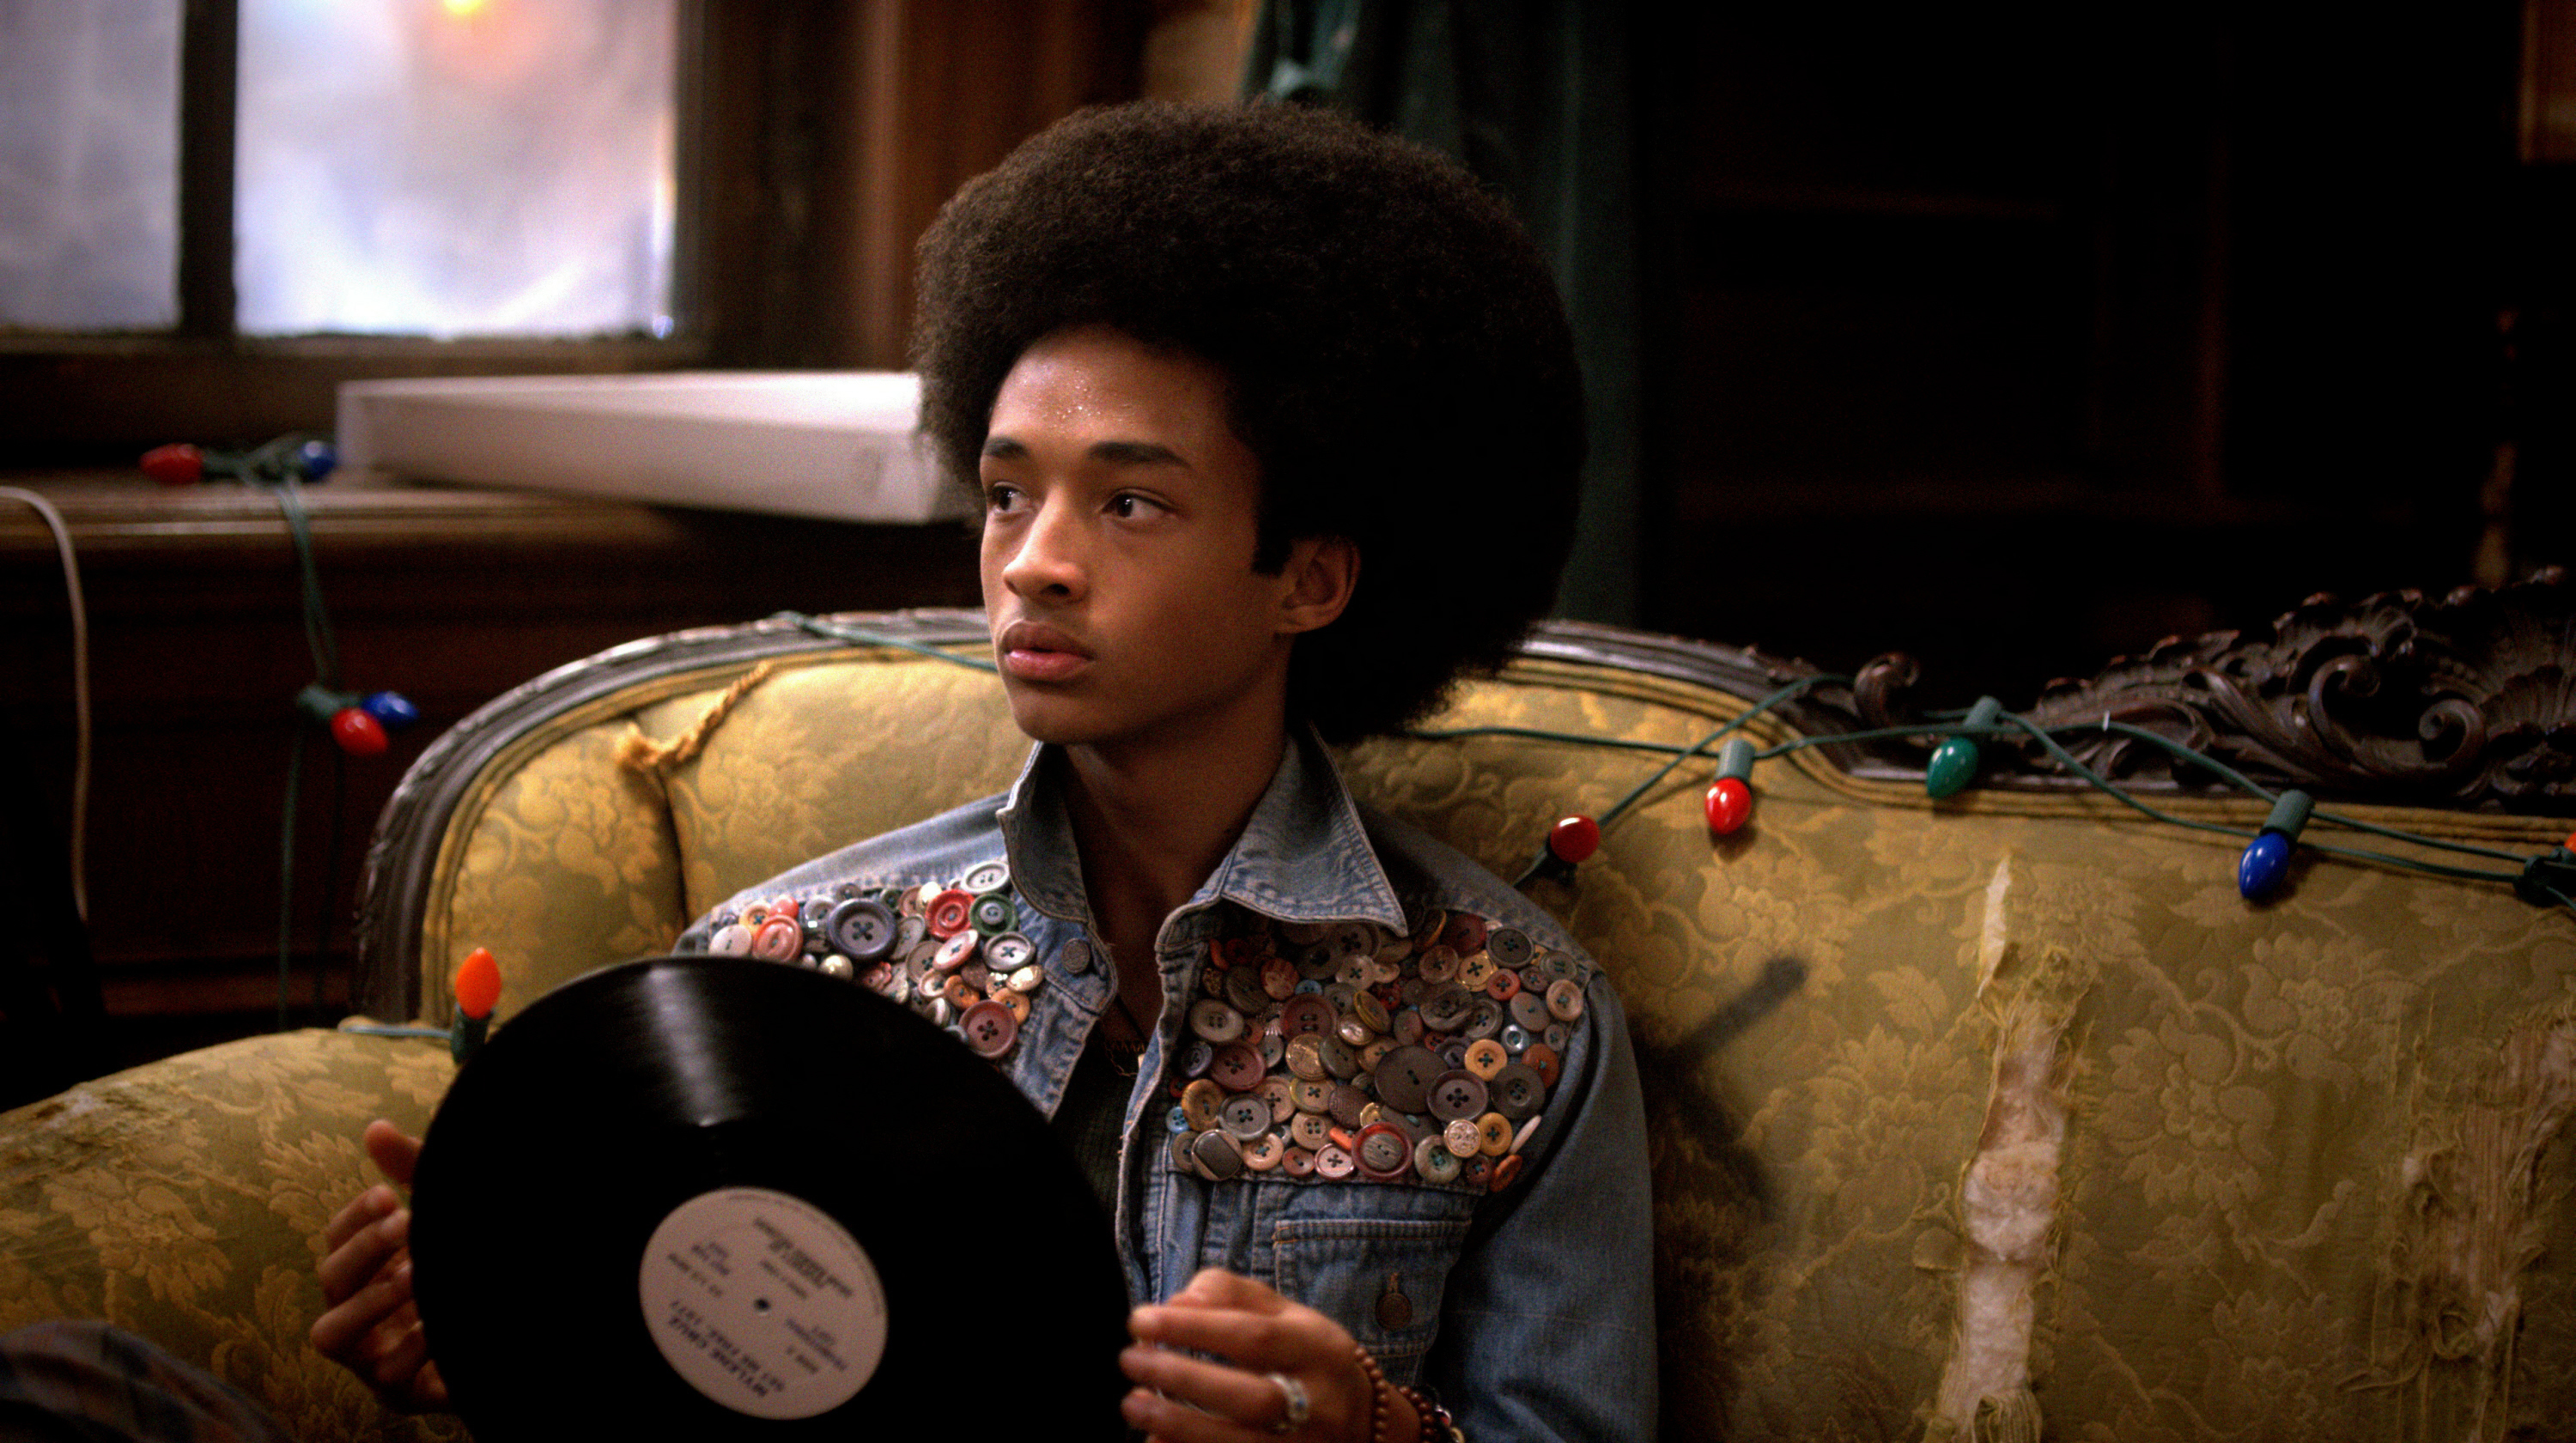 <p>"The Get Down," which debuted in 2016, barely made it past its first season on Netflix, but we think the series, which starred Jaden Smith as Marcus "Dizzee" Kipling, deserves a nod. Set in the Bronx in the 1970s during the birth of hip hop, the show (which was Oscar nominee Baz Luhrmann's first TV show -- and reportedly Netflix's most expensive-to-produce project ever thanks to a $120 budget for 12 episodes) didn't just feature powerful performances but some amazing music too. Netflix wrapped things up with a five-episode second part in 2017.</p>